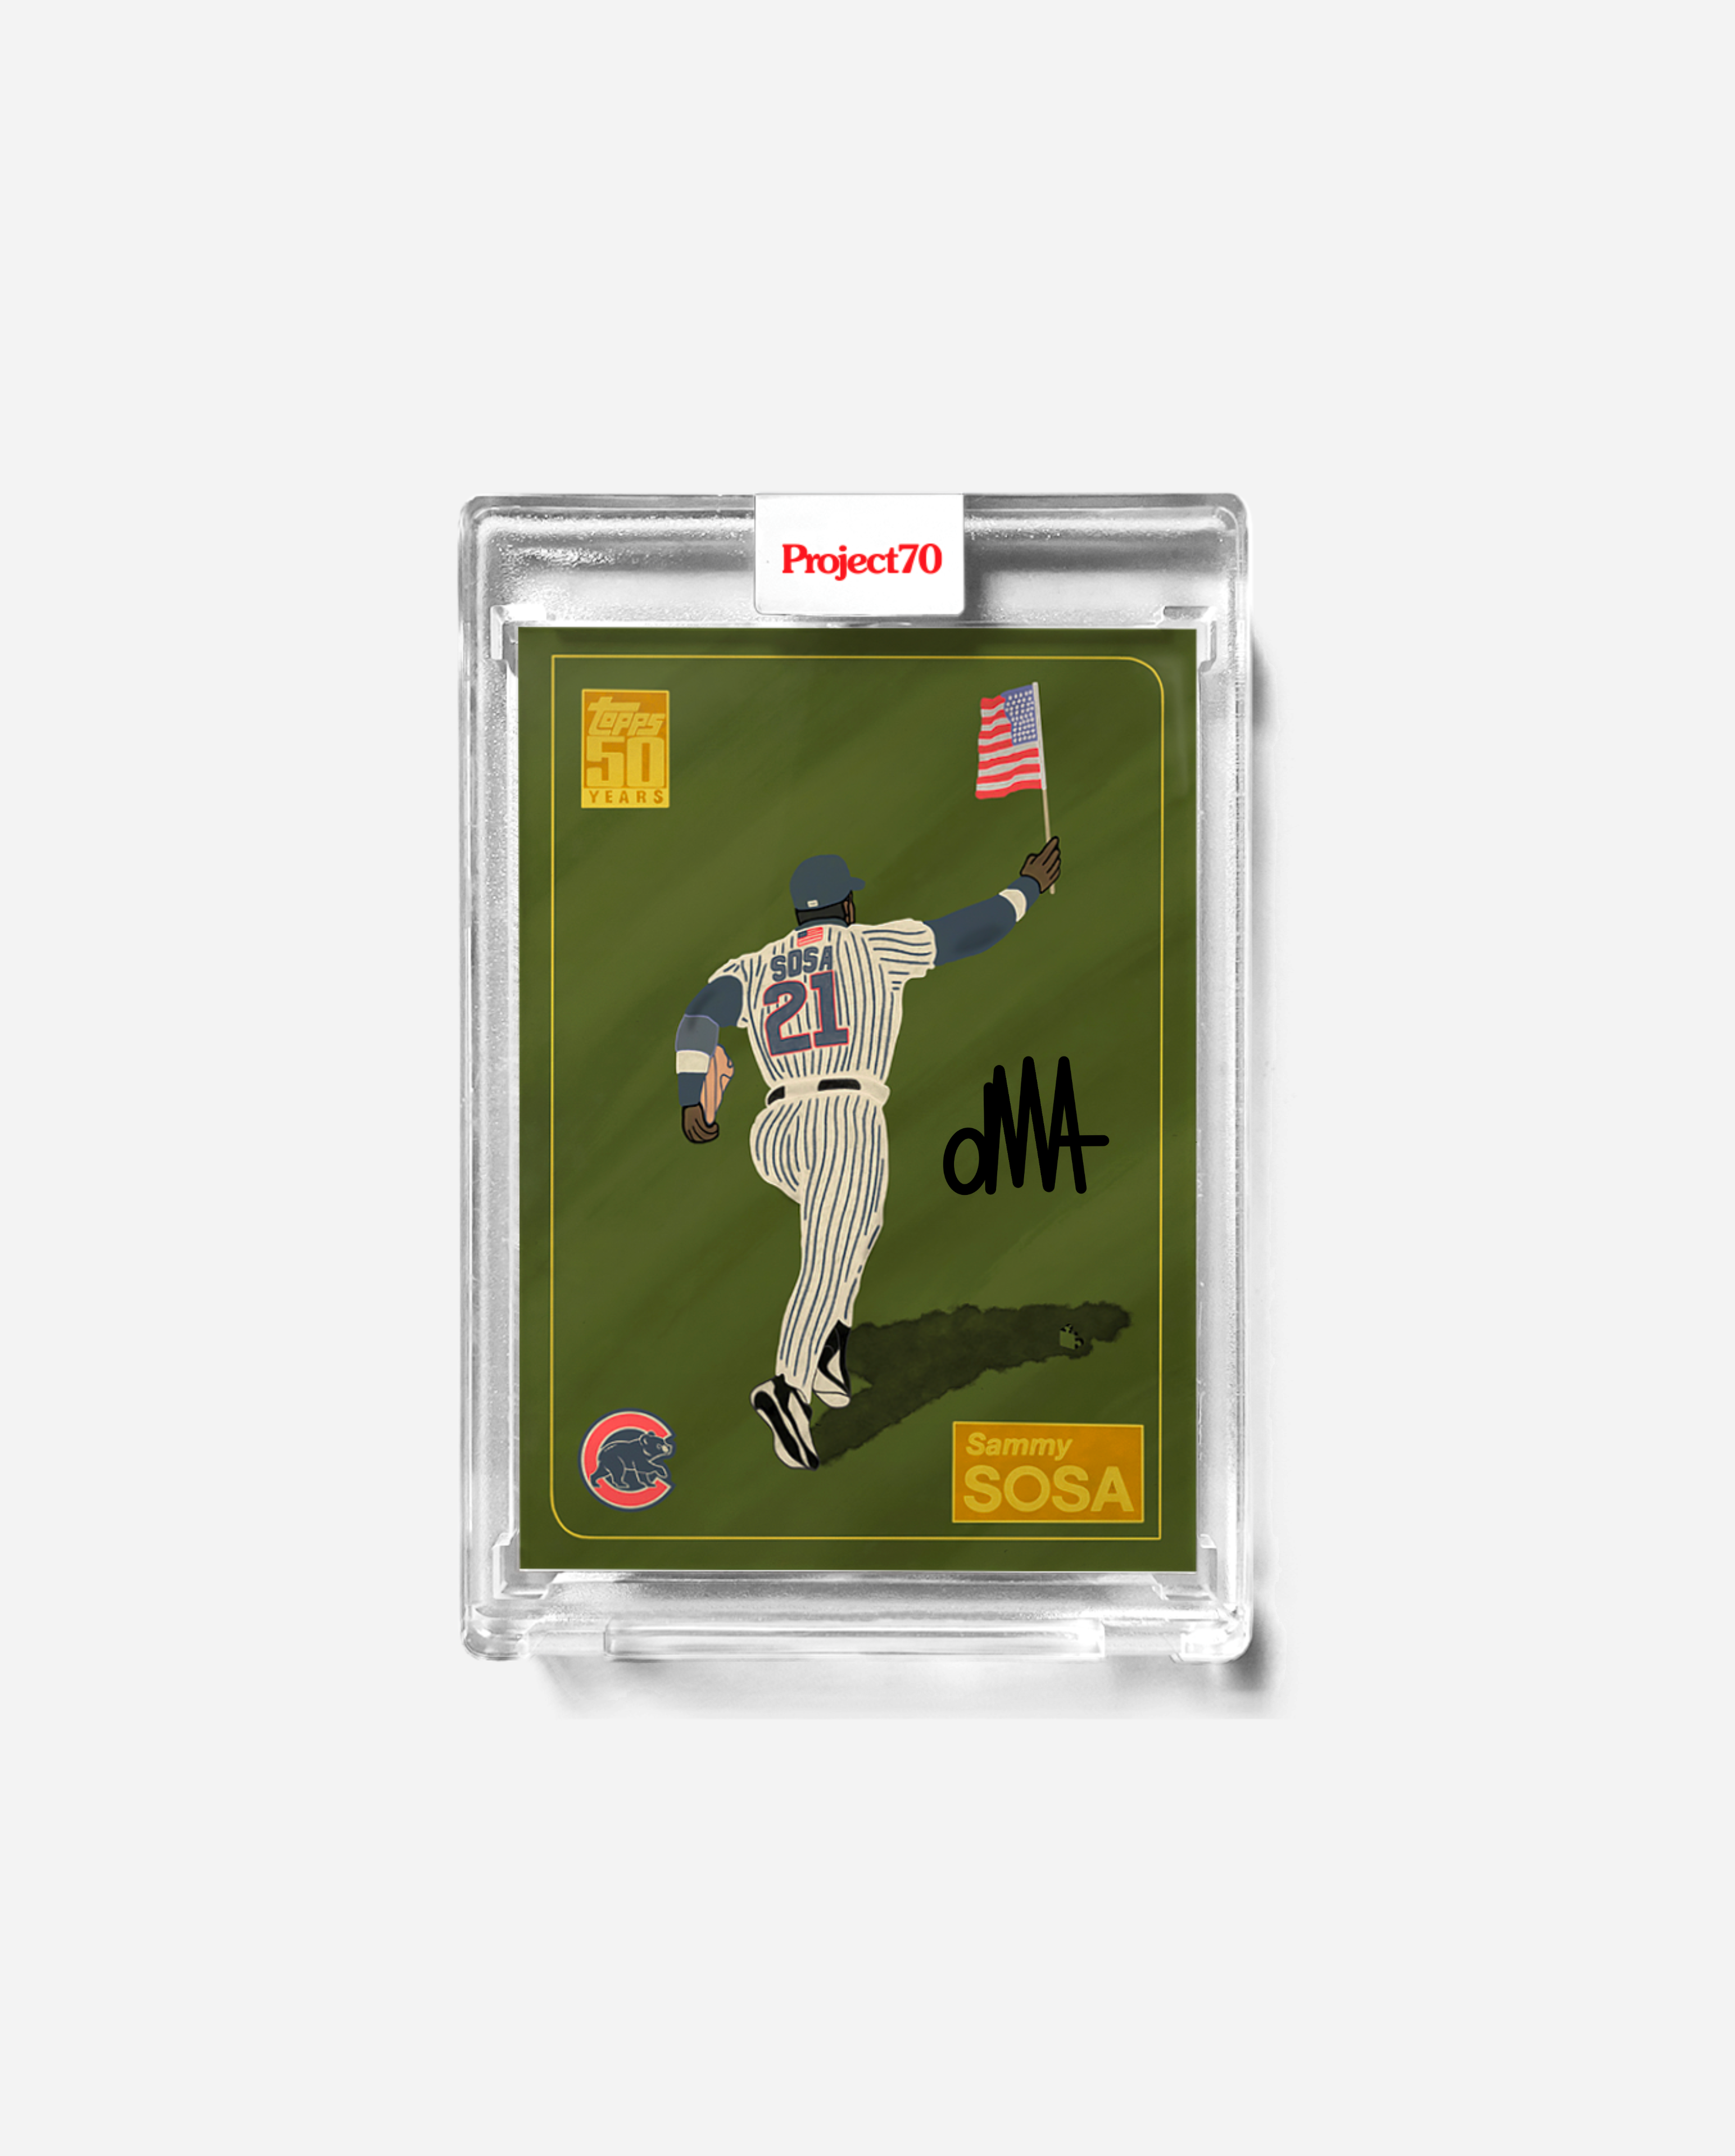 Sammy Sosa x oMA x Topps Project 70 Autographed Card